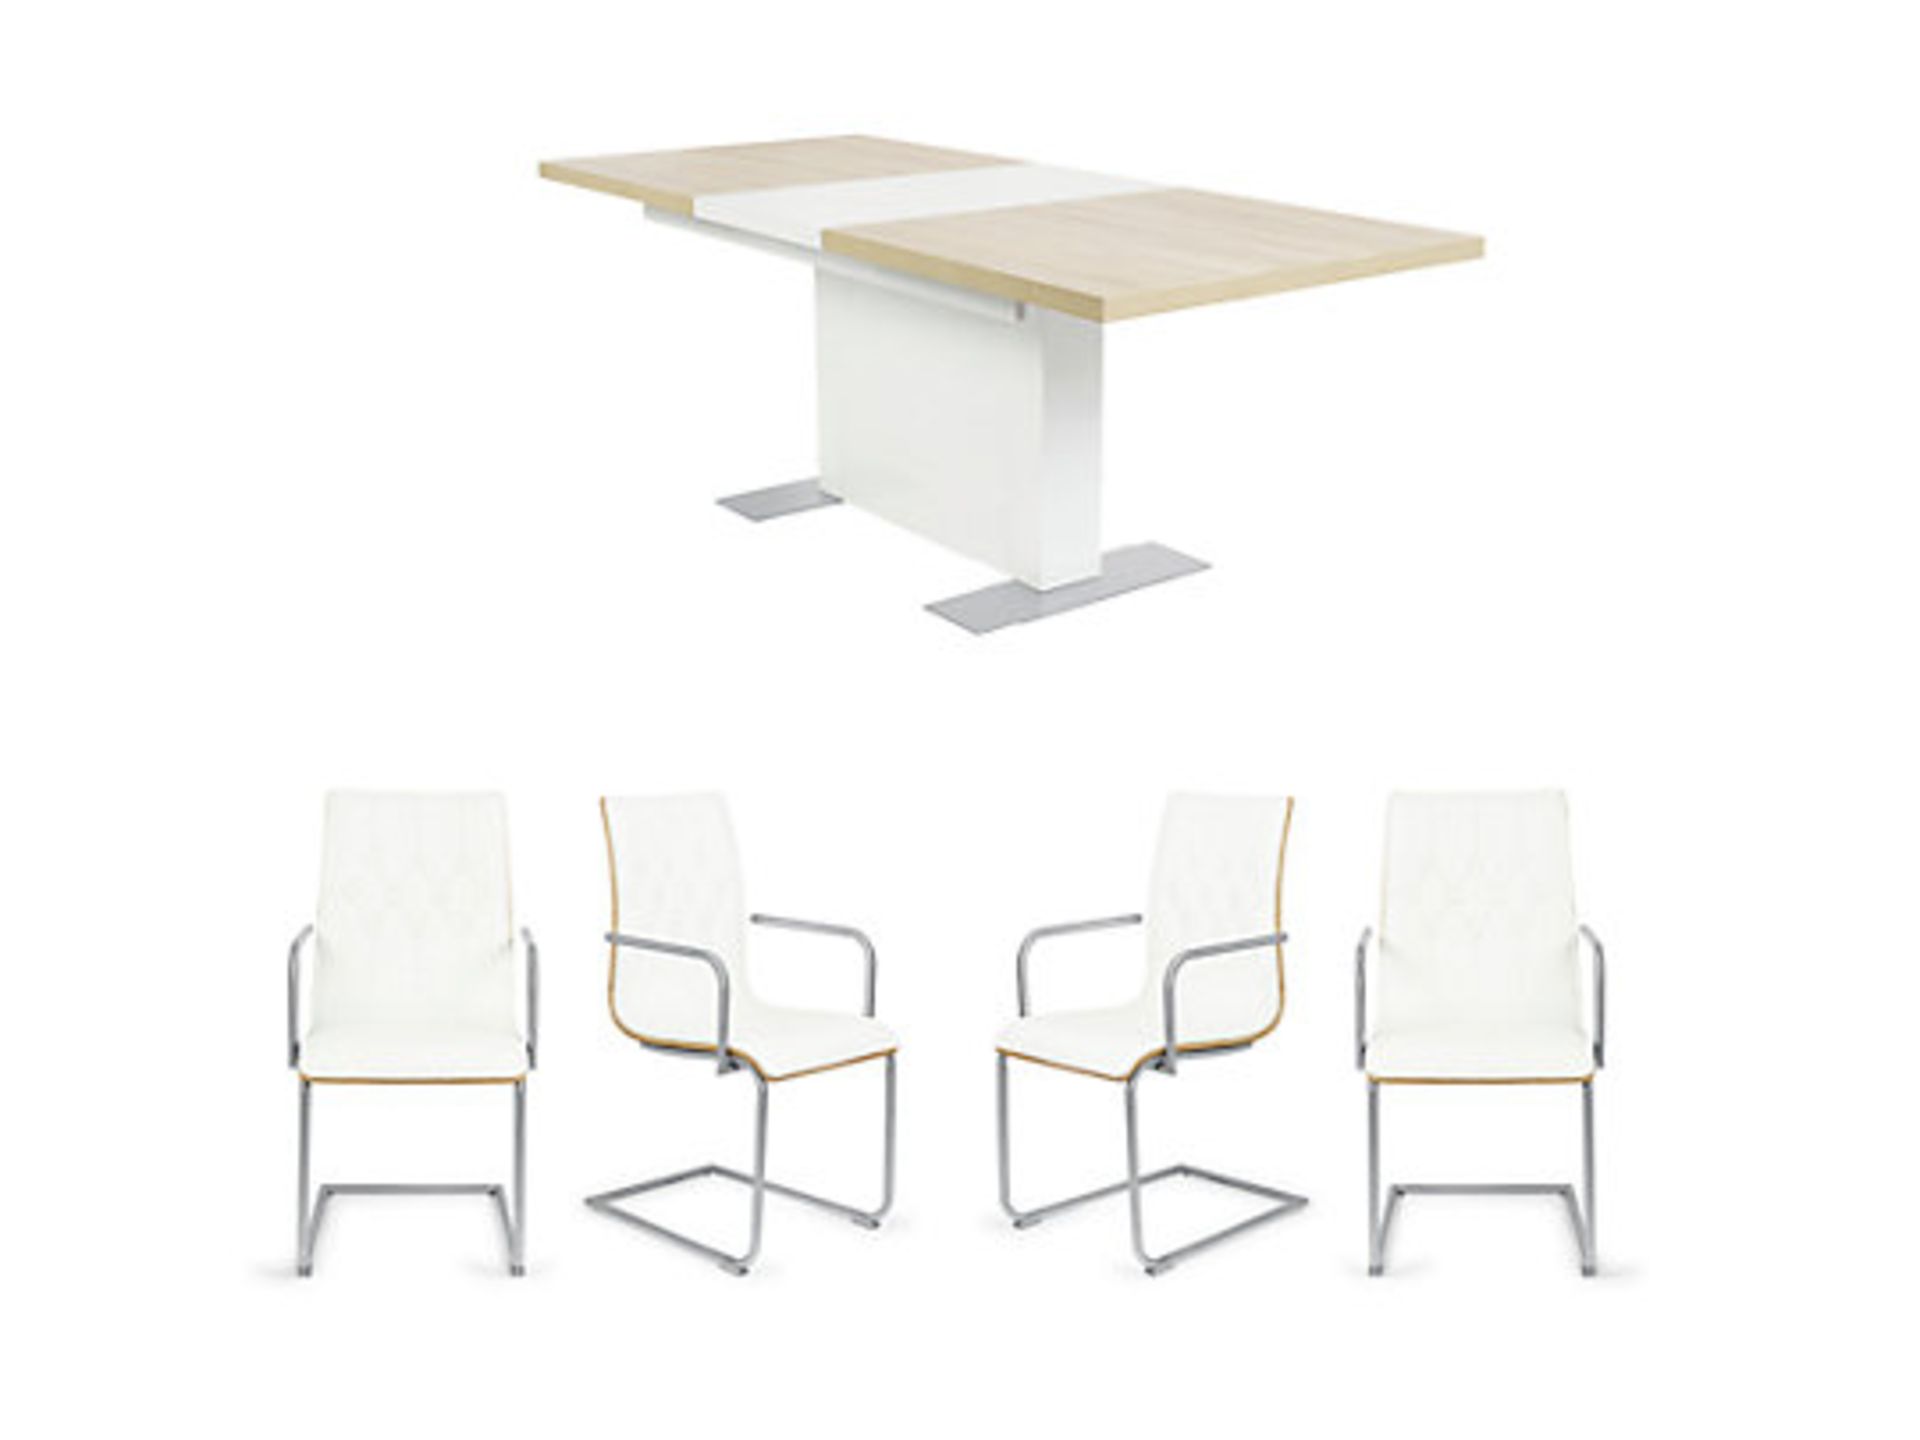 Brand New Boxed Vieux White Extending Dining Table - Image 2 of 2